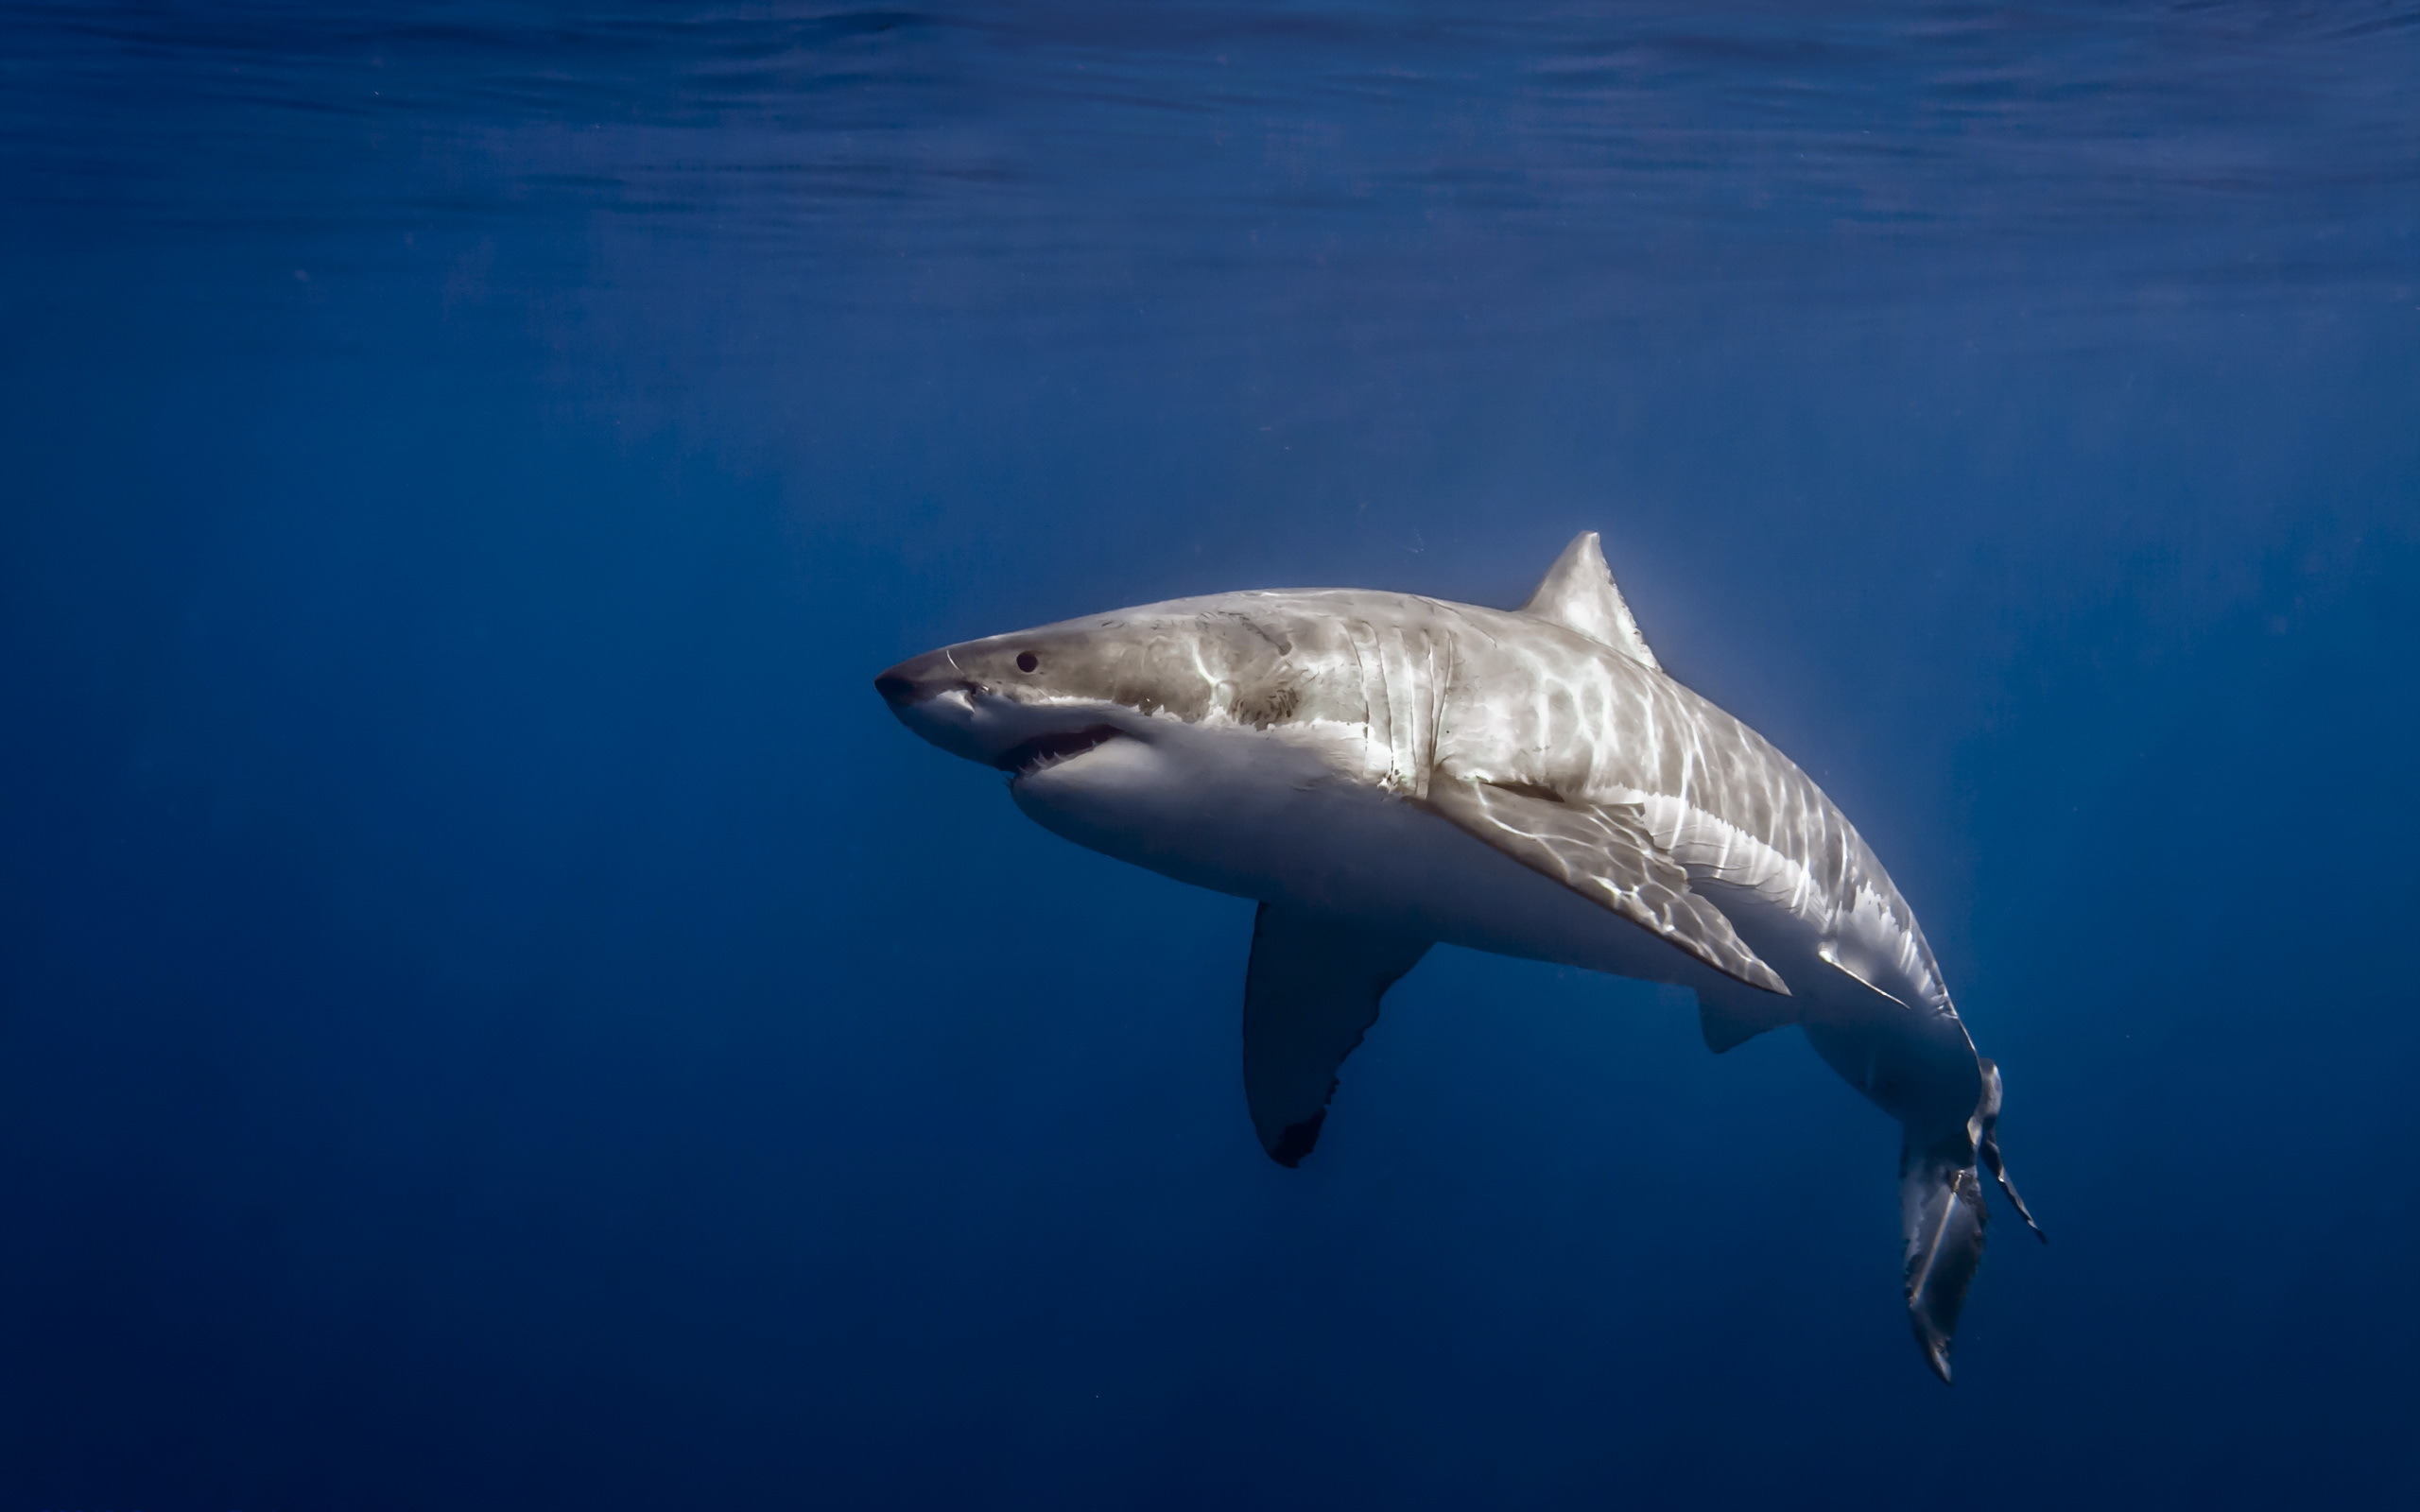 Original Caption The Great White Shark Carcharodon Cacharias Is